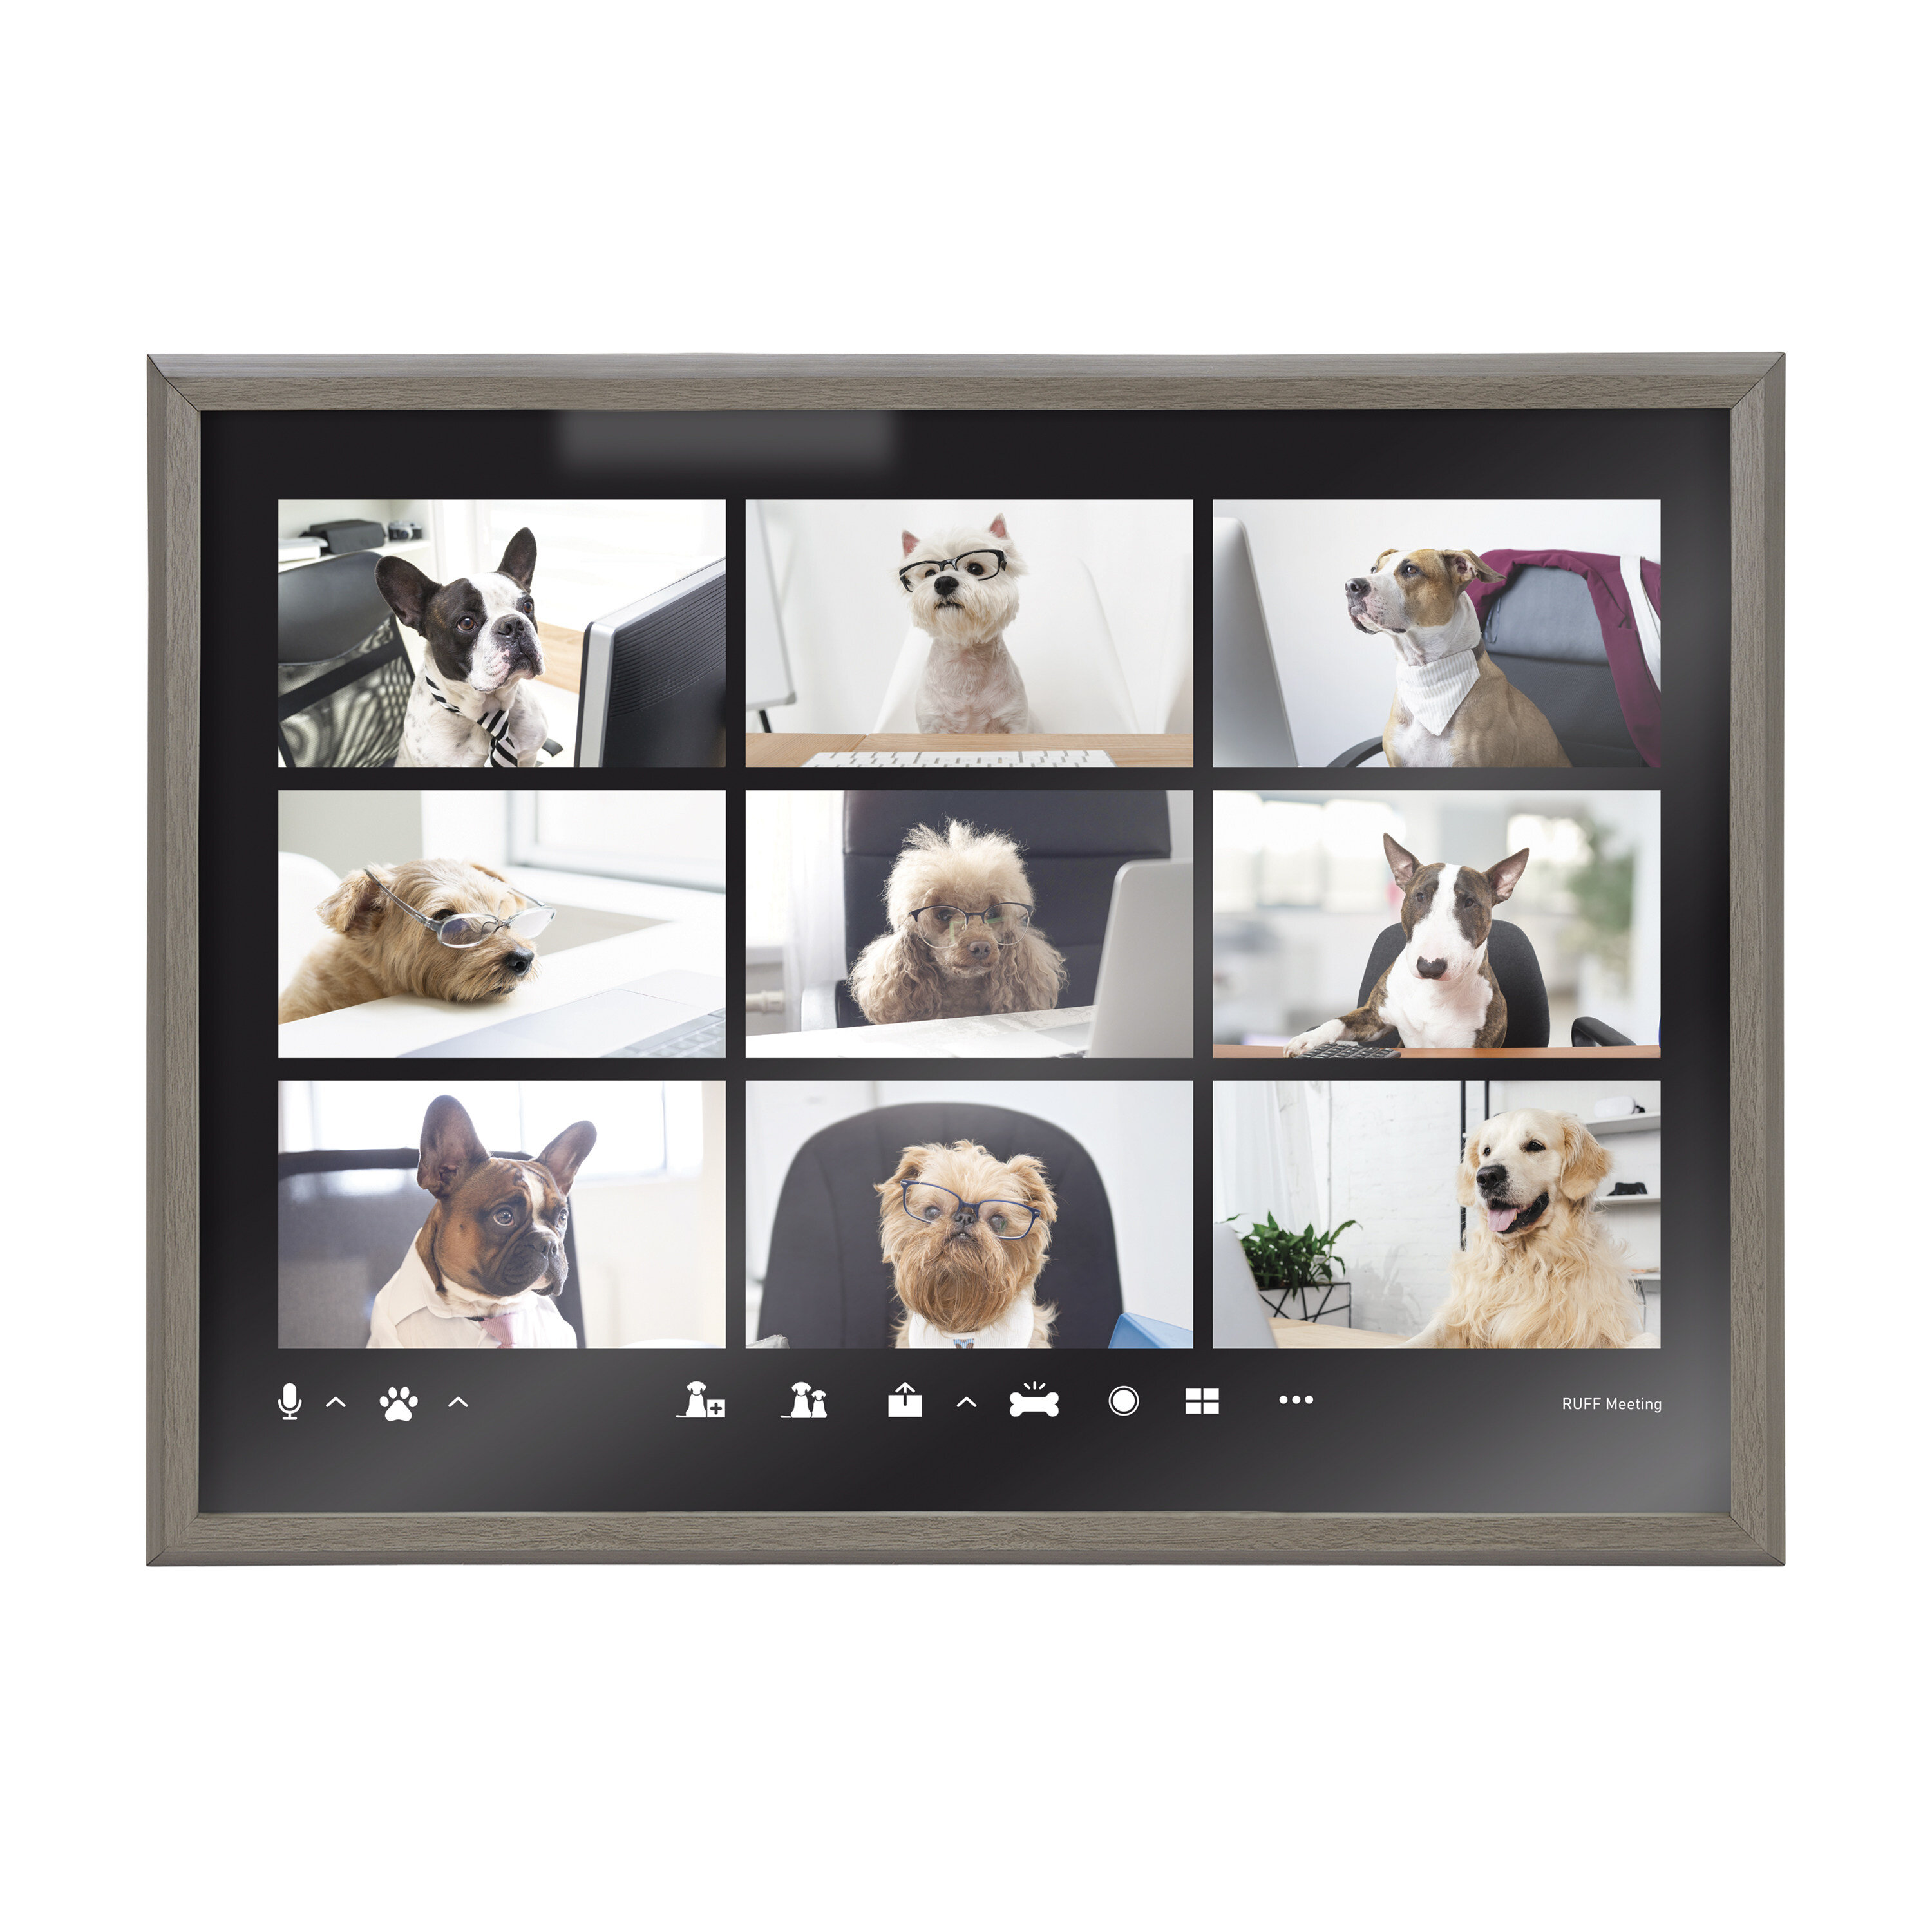 Xxx Video Importent Video - Latitude RunÂ® Video Chat Dogs - Picture Frame Graphic Art on Glass | Wayfair